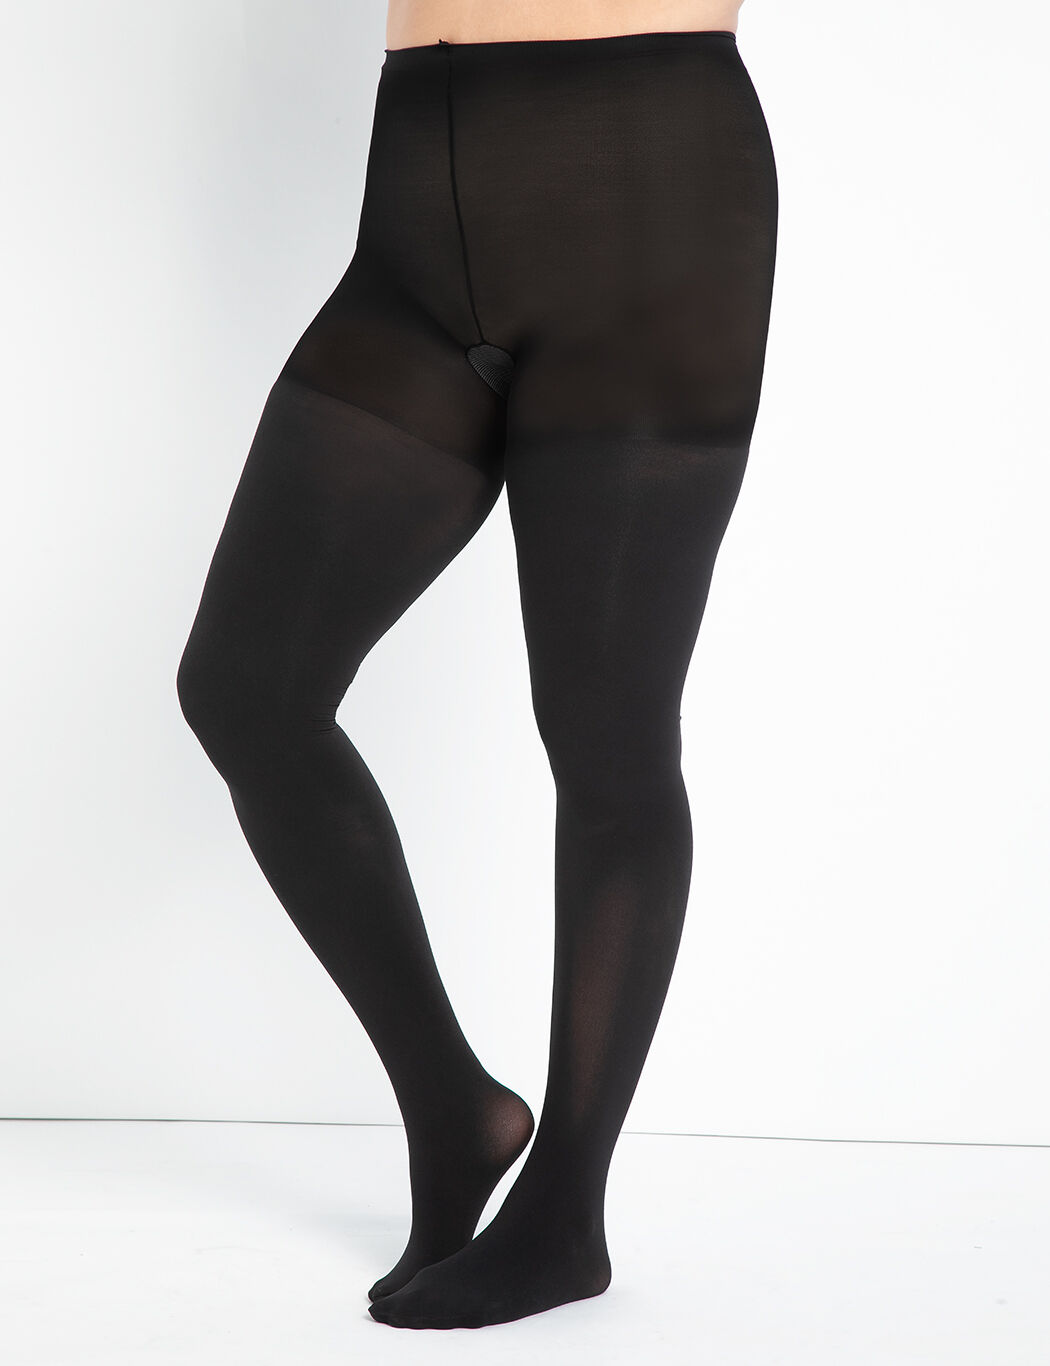 Plus Size Women Premium Opaque Tights By ( Size 14/16 )